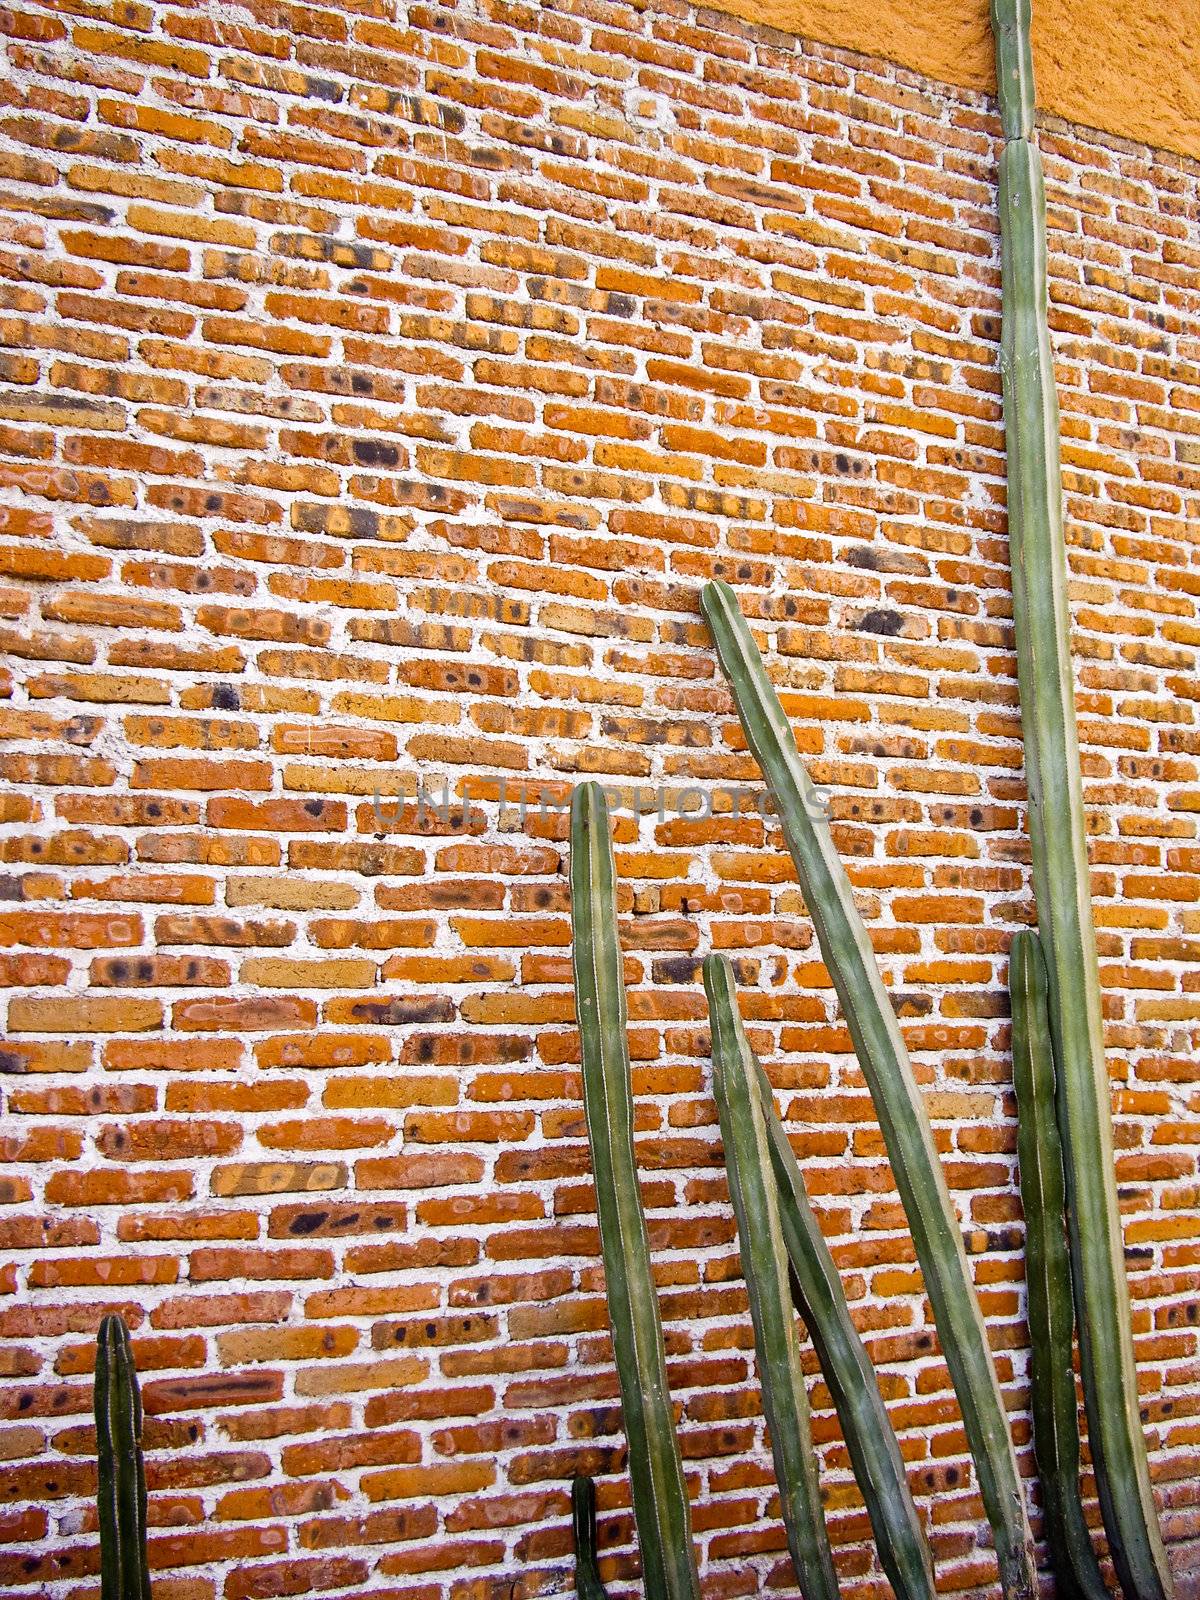 Tall Cacti against an old brick wall  by emattil